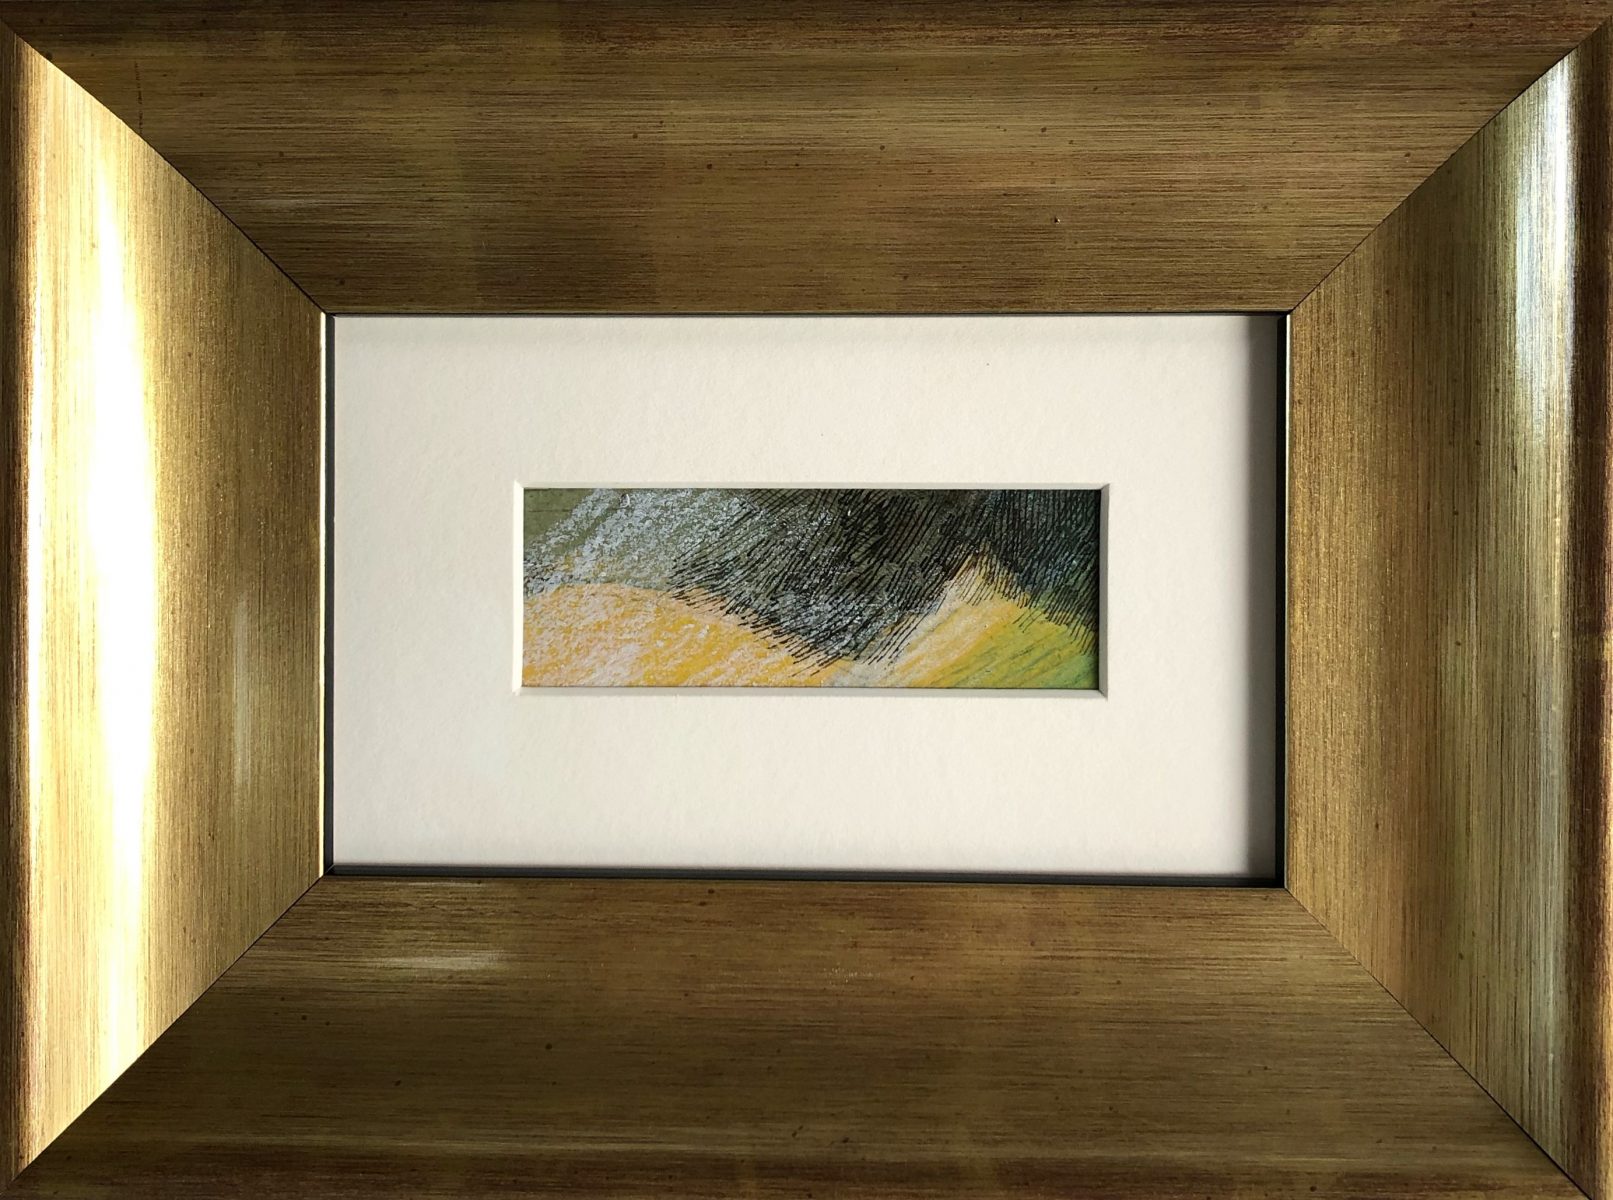 The dunes 2021 | David Green | Indian ink, watercolour and coloured pencil on paper | 15.7 x 21 cm framed | $480